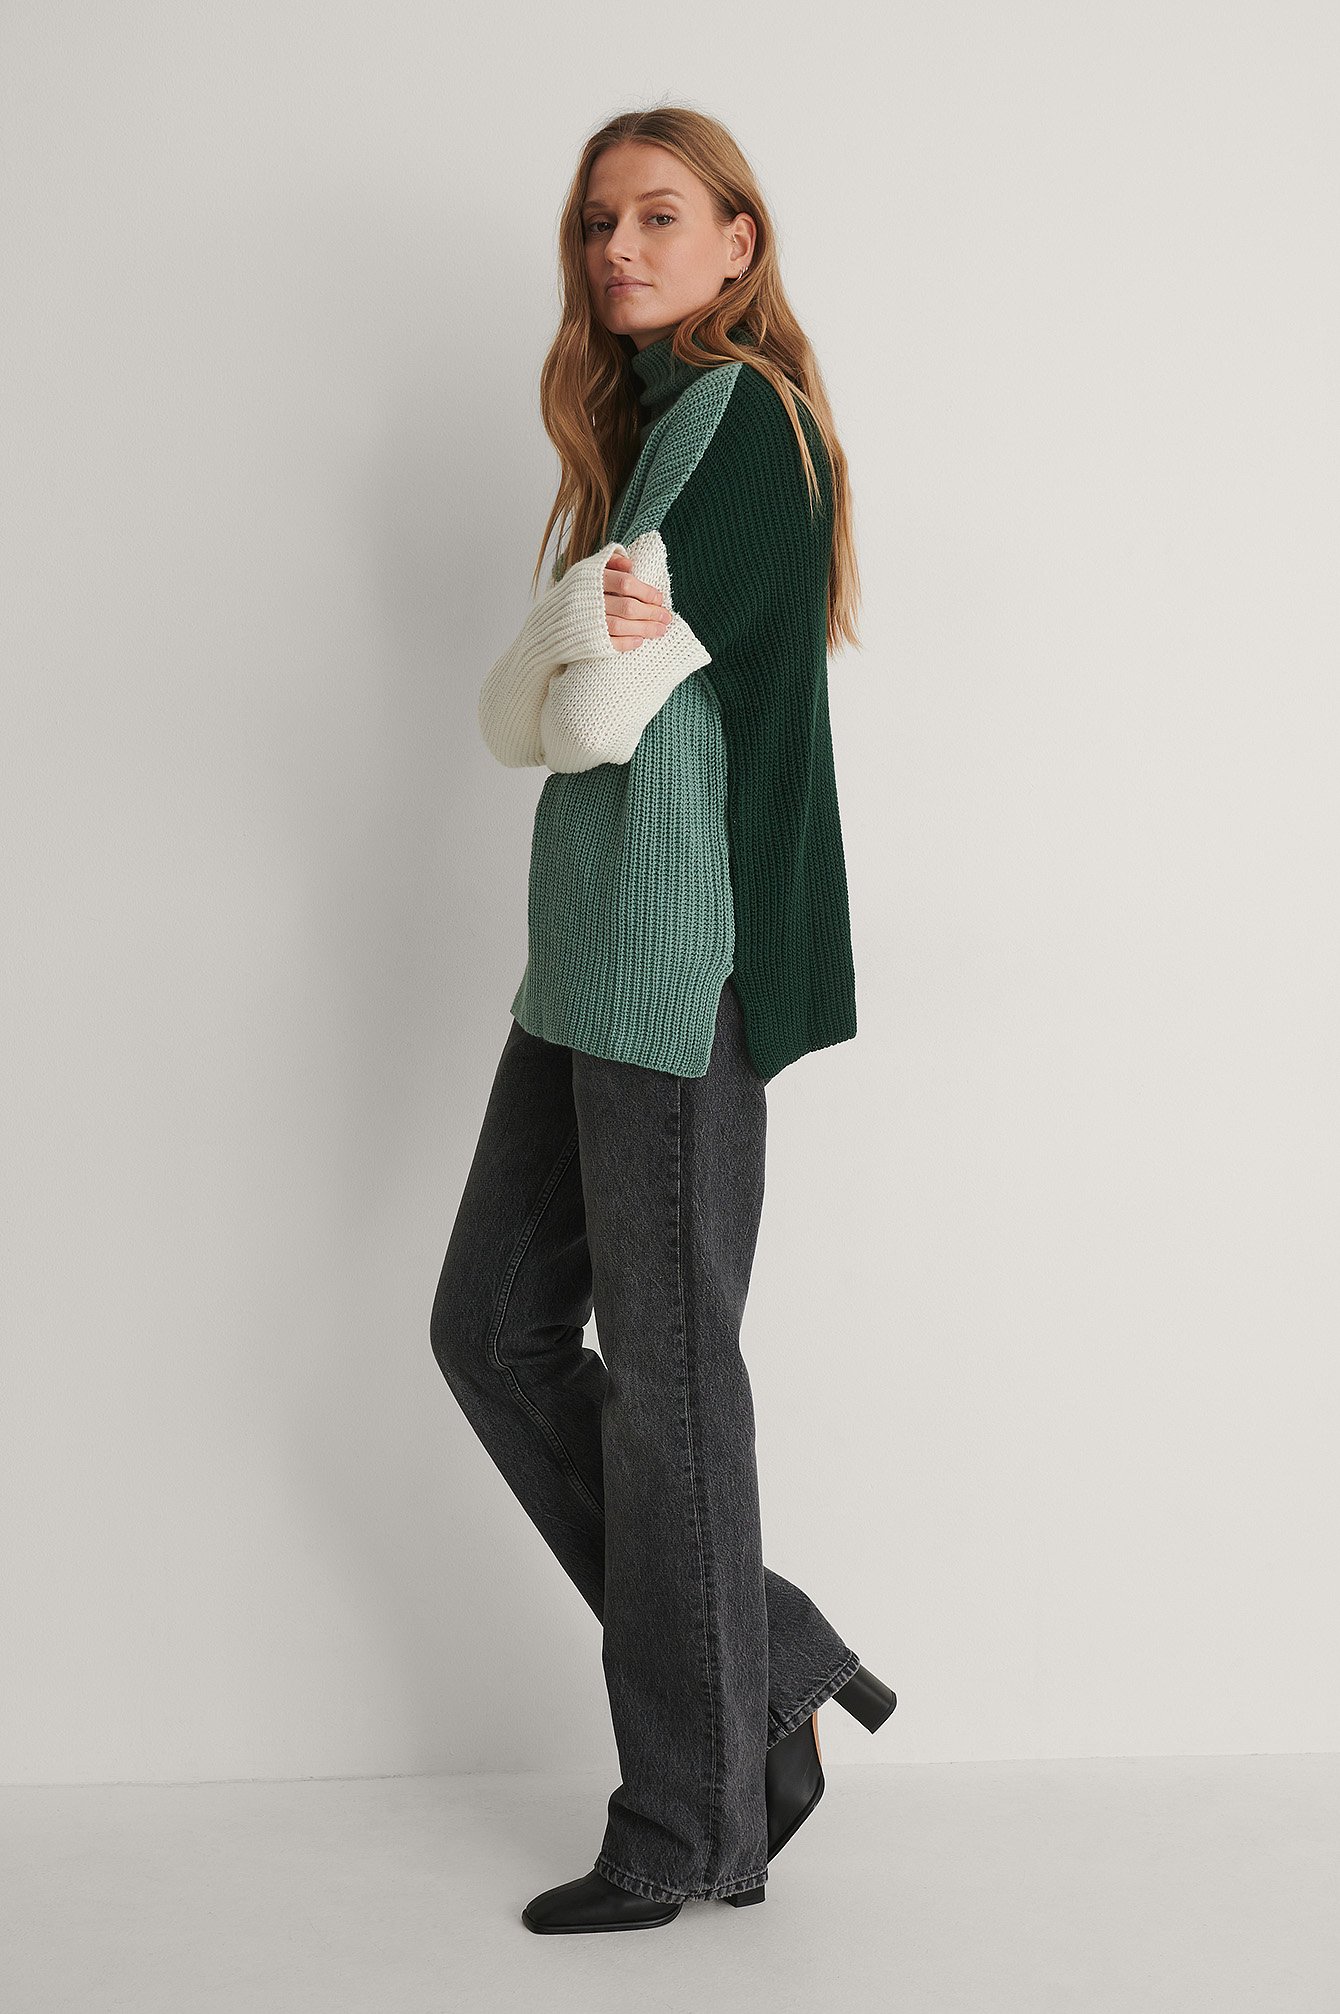 Color Block Knit Sweater Outfit.